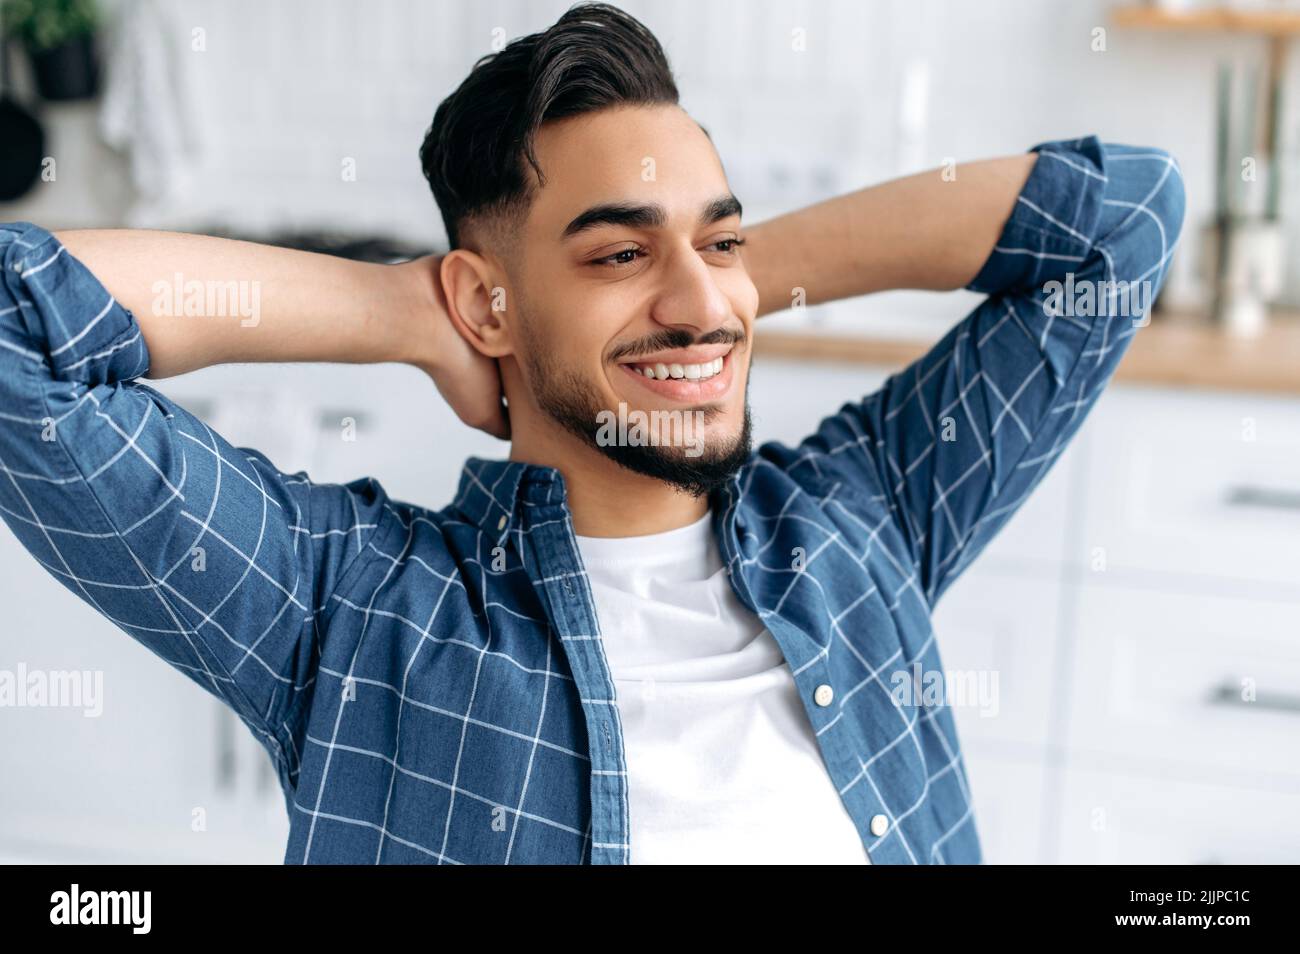 Close-up photo of a happy relaxed arabian or indian guy, freelancer, working from home, sits in the kitchen, takes a break from work, puts his hands behind his head, looks directly, dreaming, smiles Stock Photo